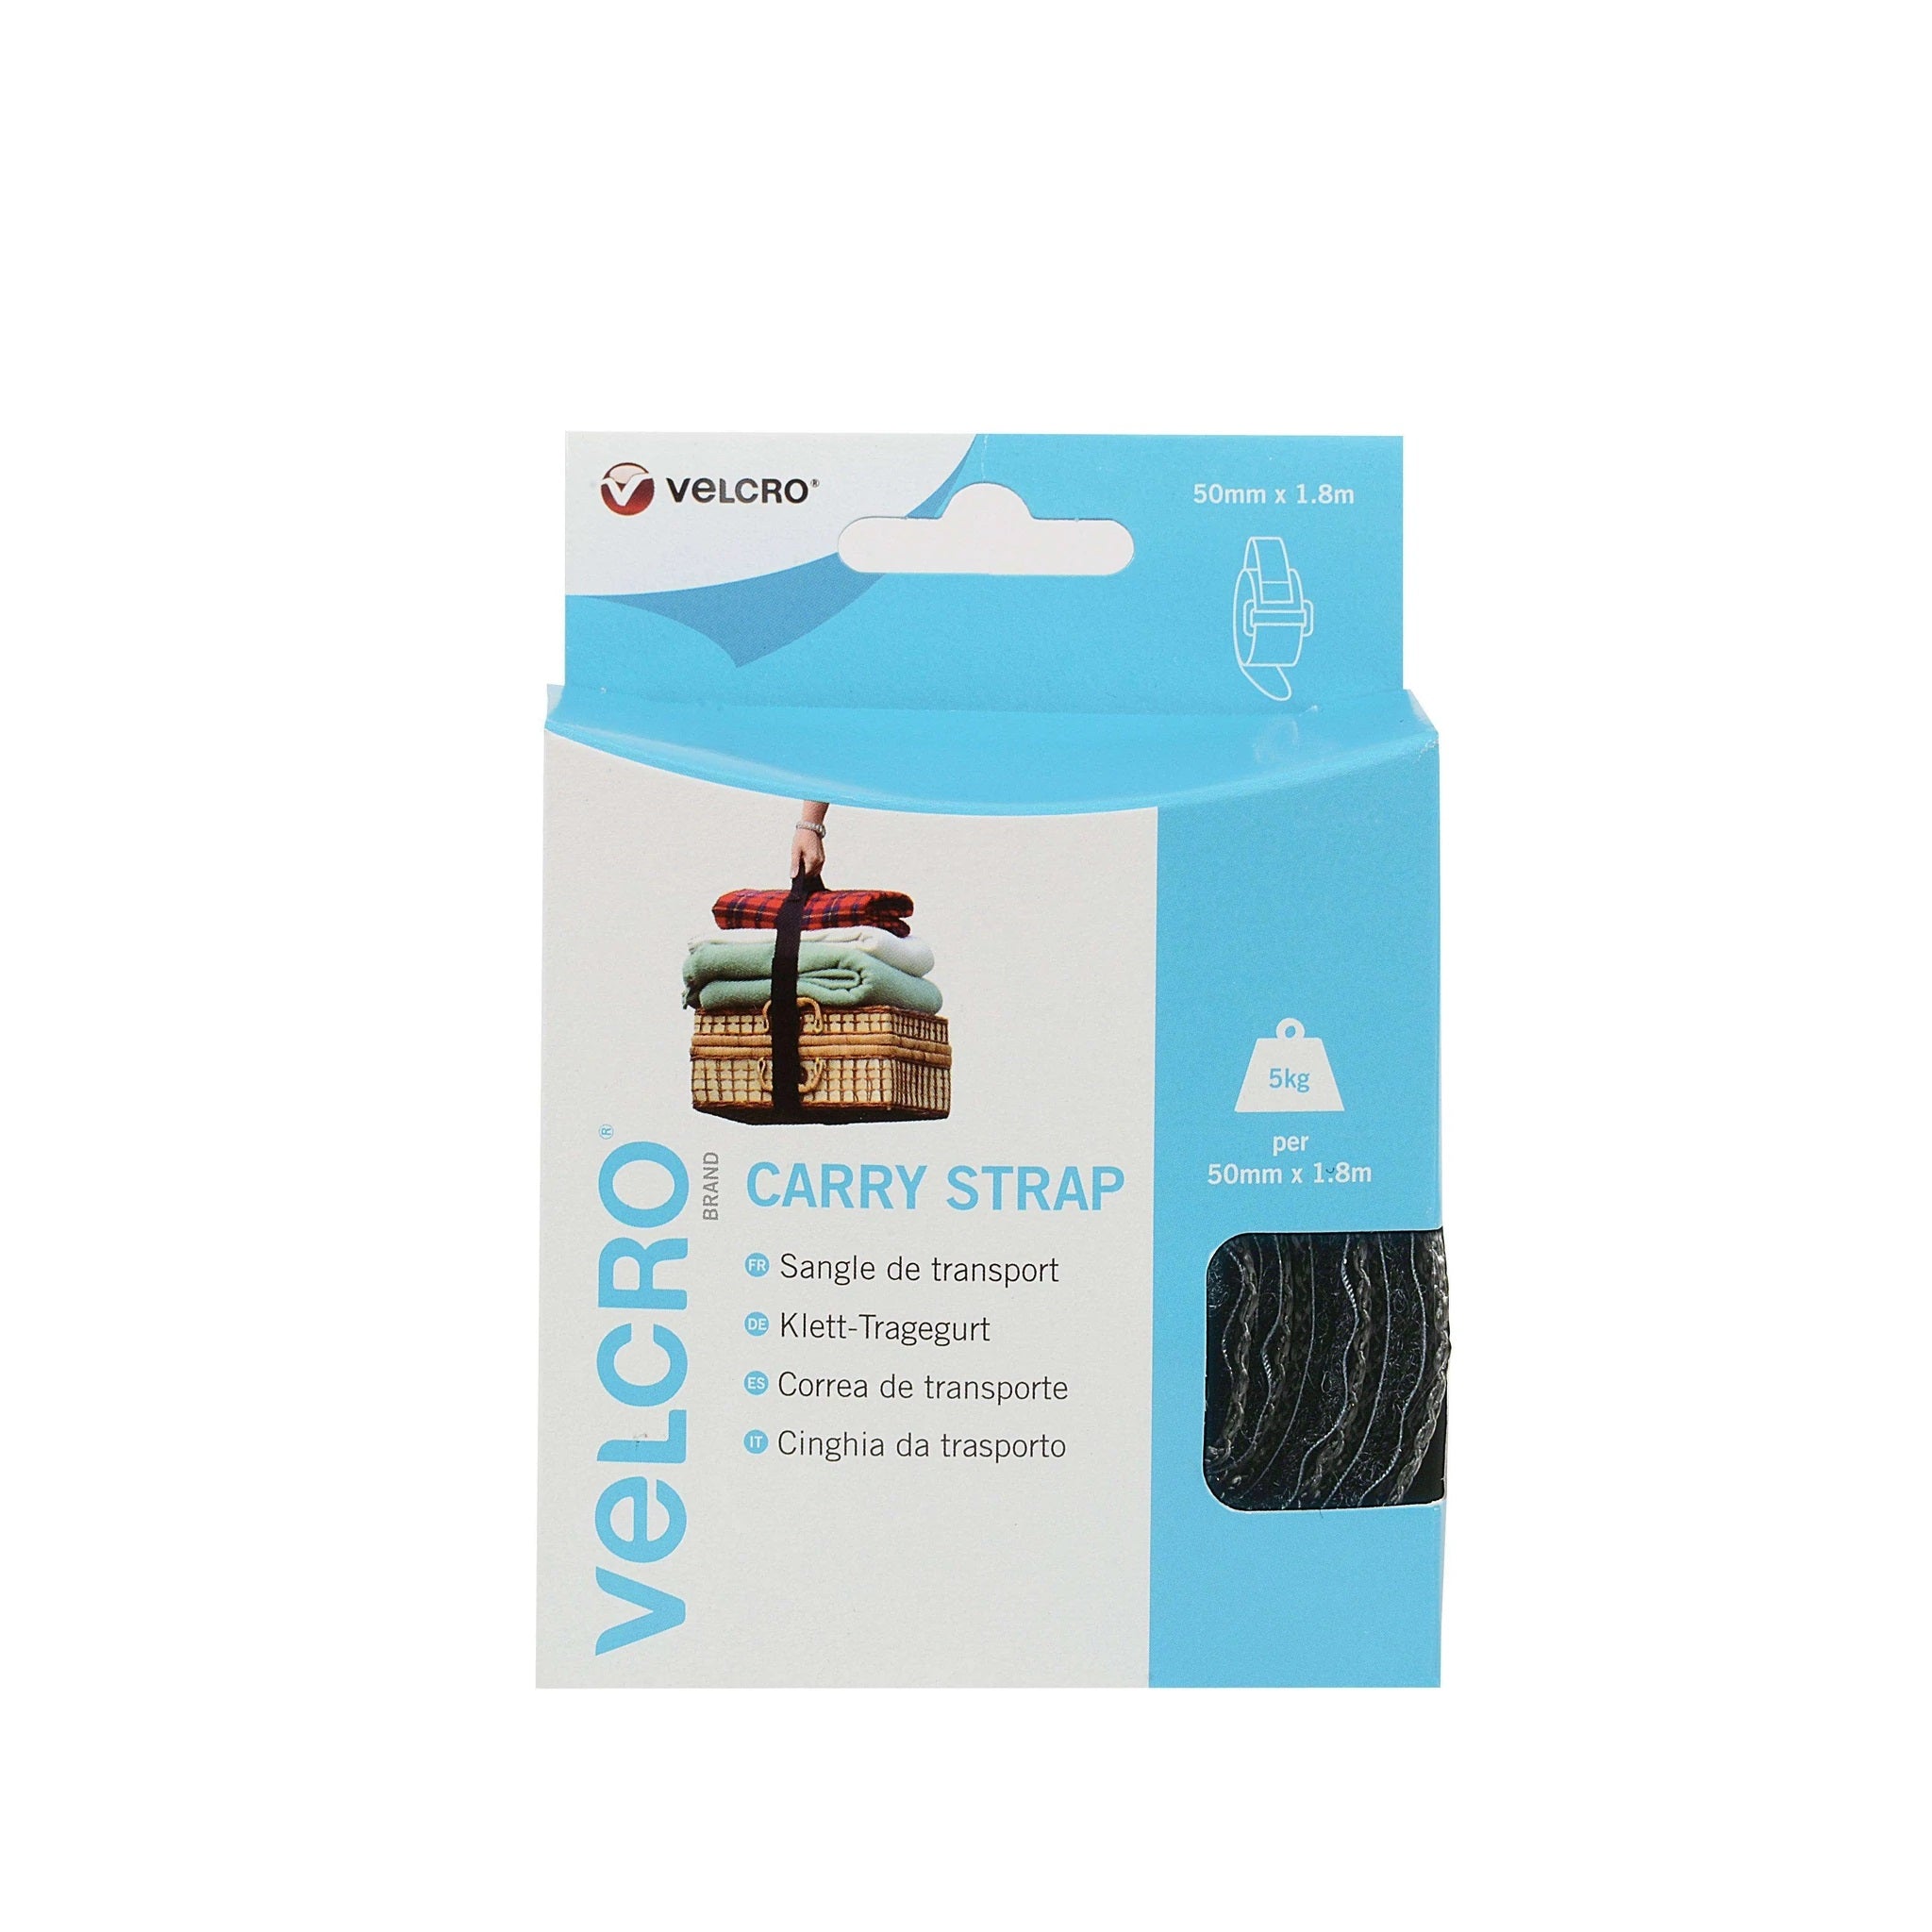 VELCRO® Brand Carry Strap 50mm x 1.8M - Pack of 1